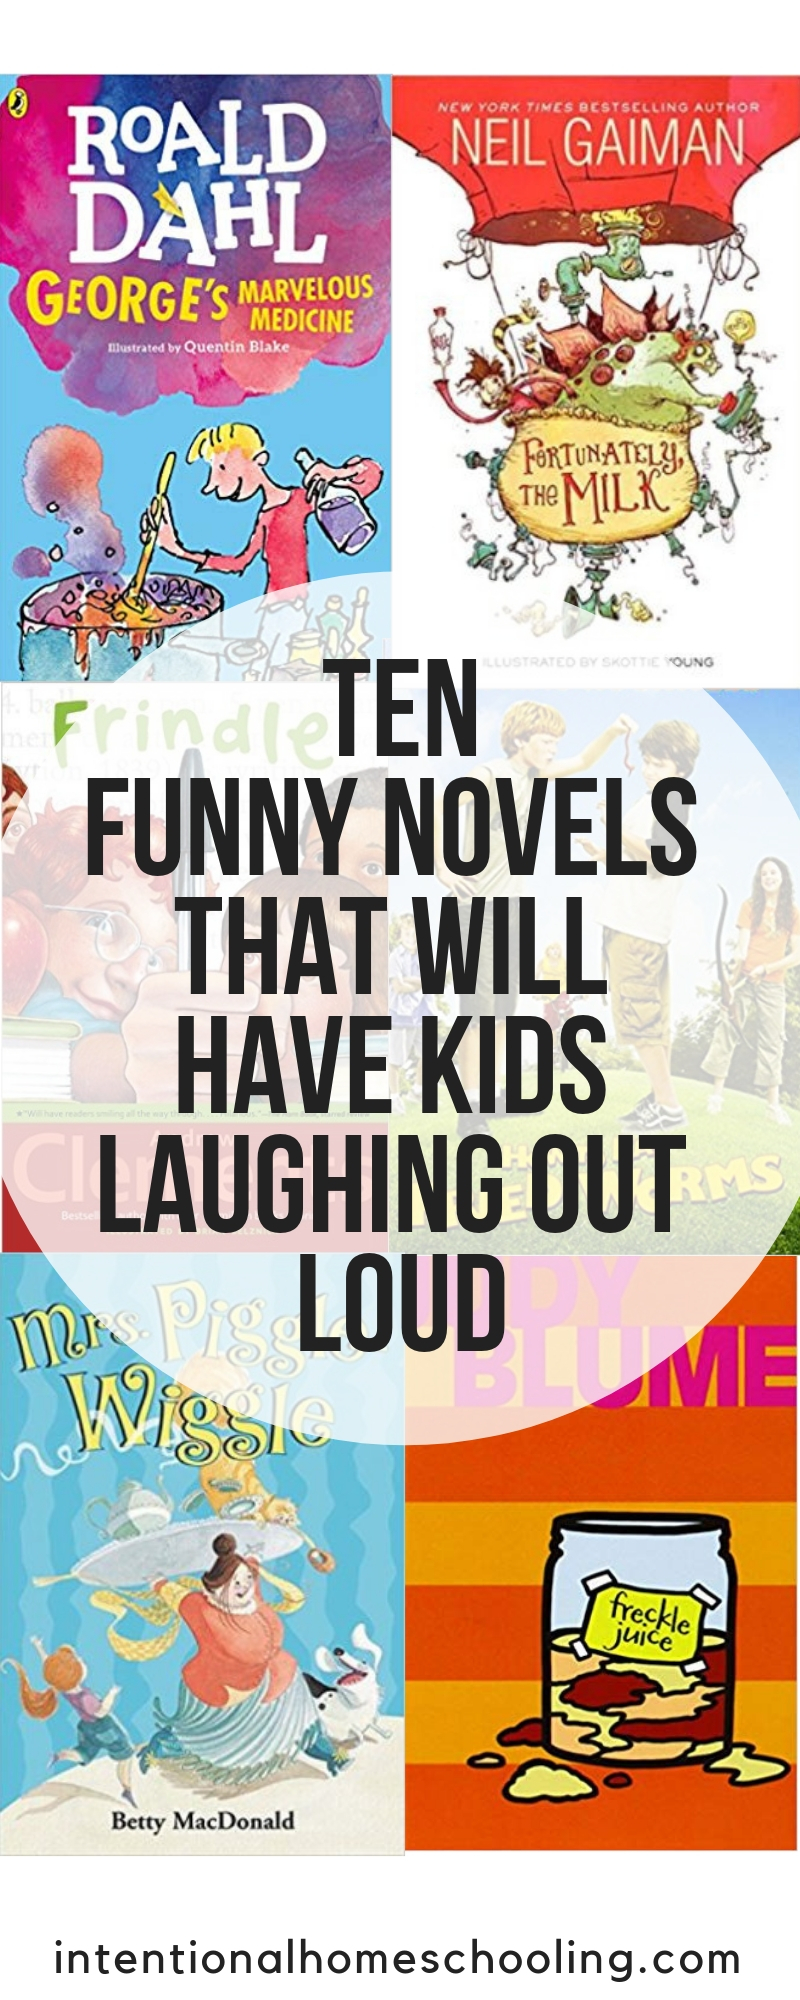 Laugh-Out-Loud Funny Beginning Chapter Book Series: Ages 6-10